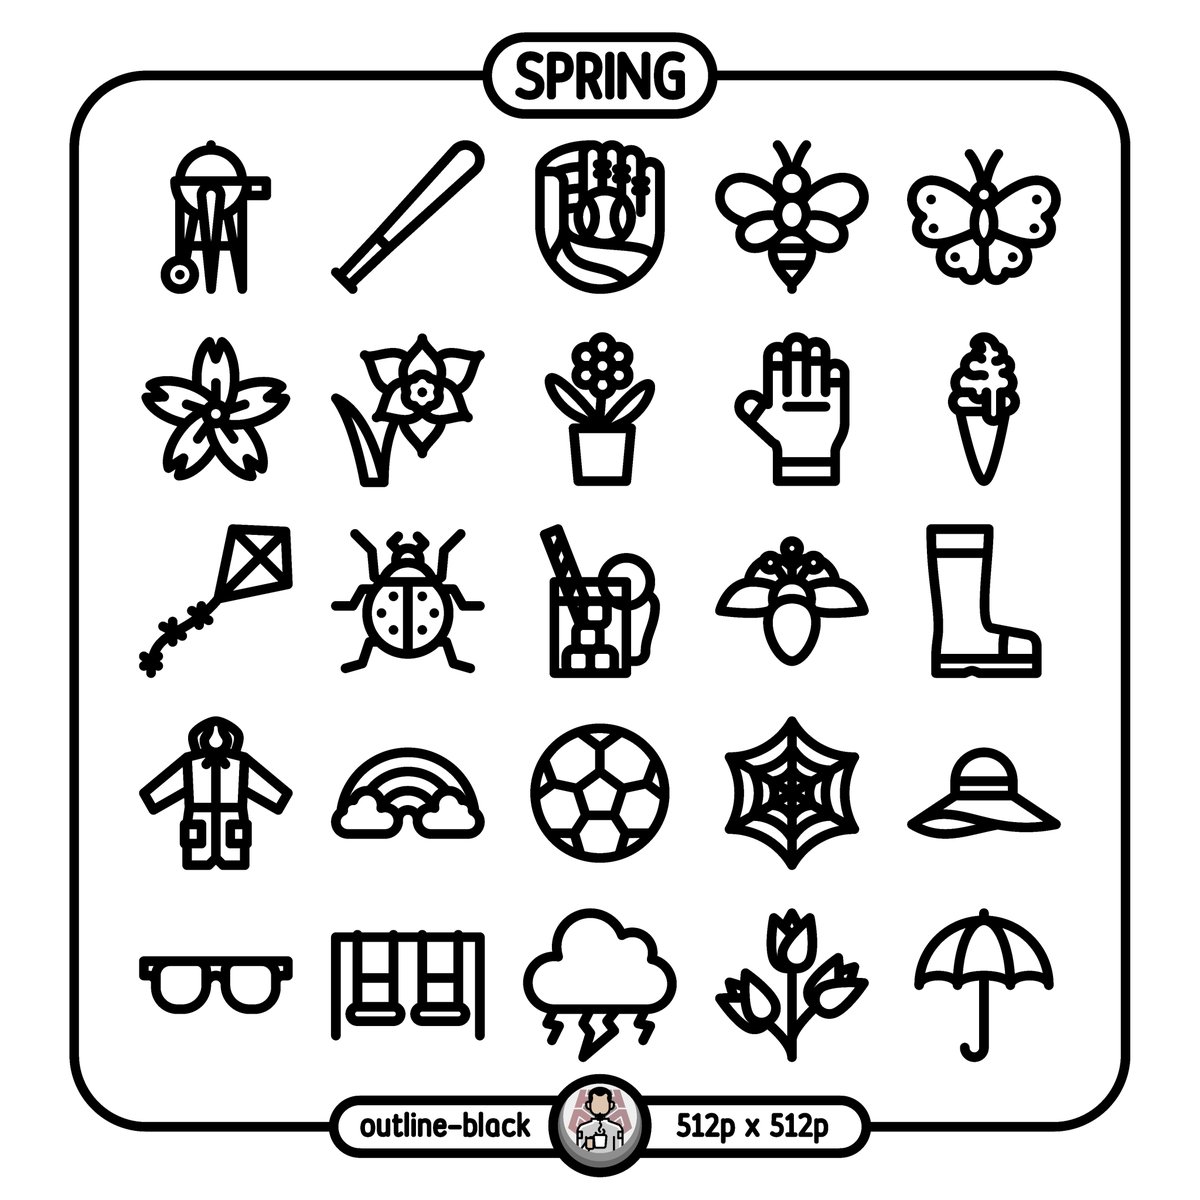 Link in bio! Don't forget to check my collections!😉

#icon #spring #outline #black #season #iconscout #iconfinder #flaticon #nounproject #sports #plants #flower #animal #butterfly #bug #weather #theme